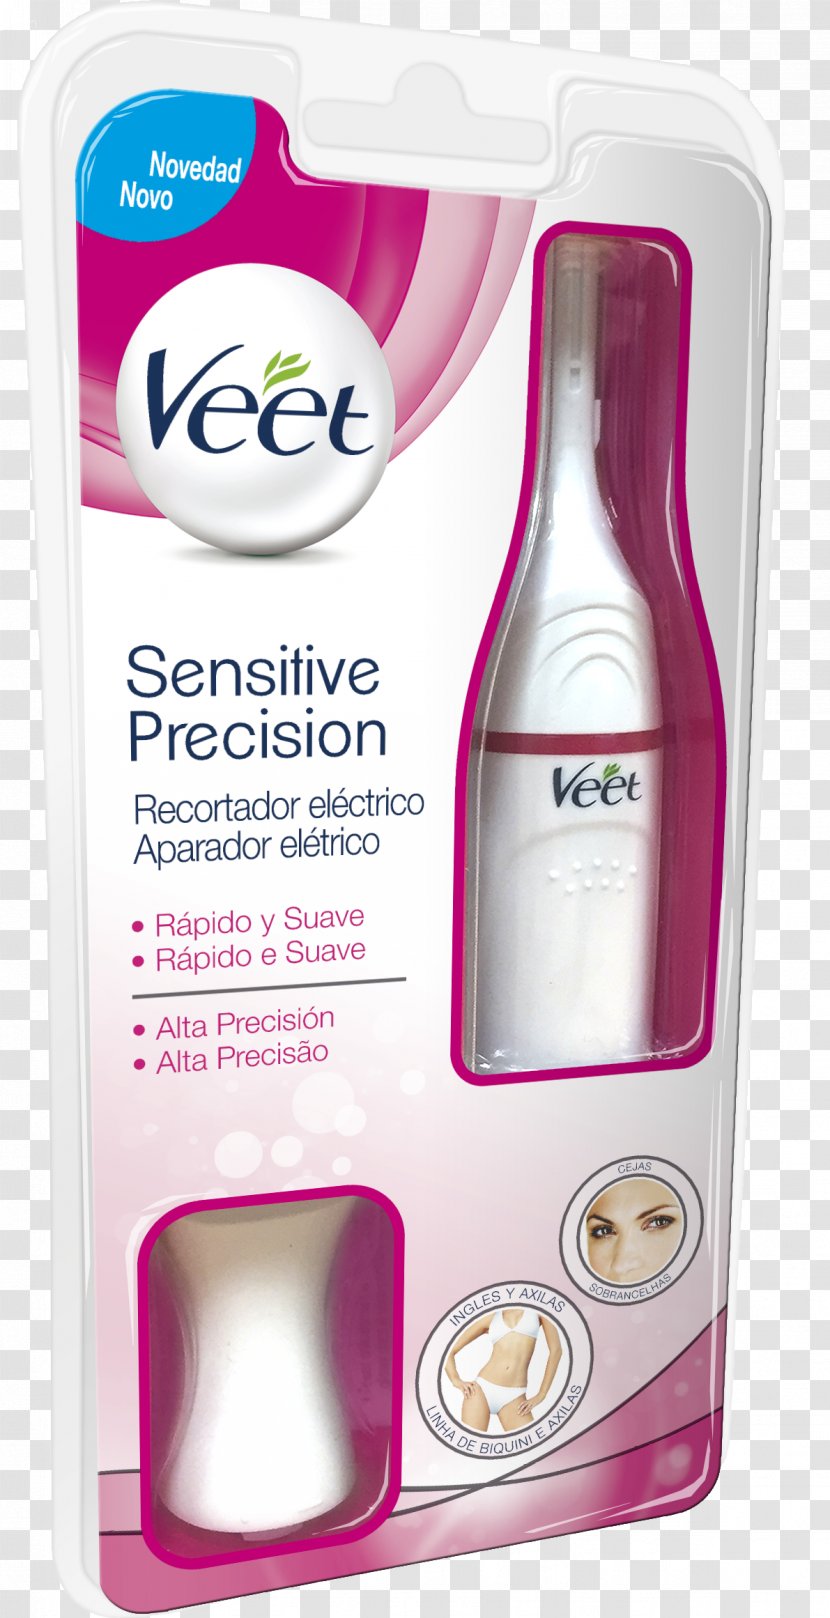 Veet Sensitive Precision Beauty Styler Touch Hair Removal Electric Razors & Trimmers - Styling Products - Pernas Transparent PNG